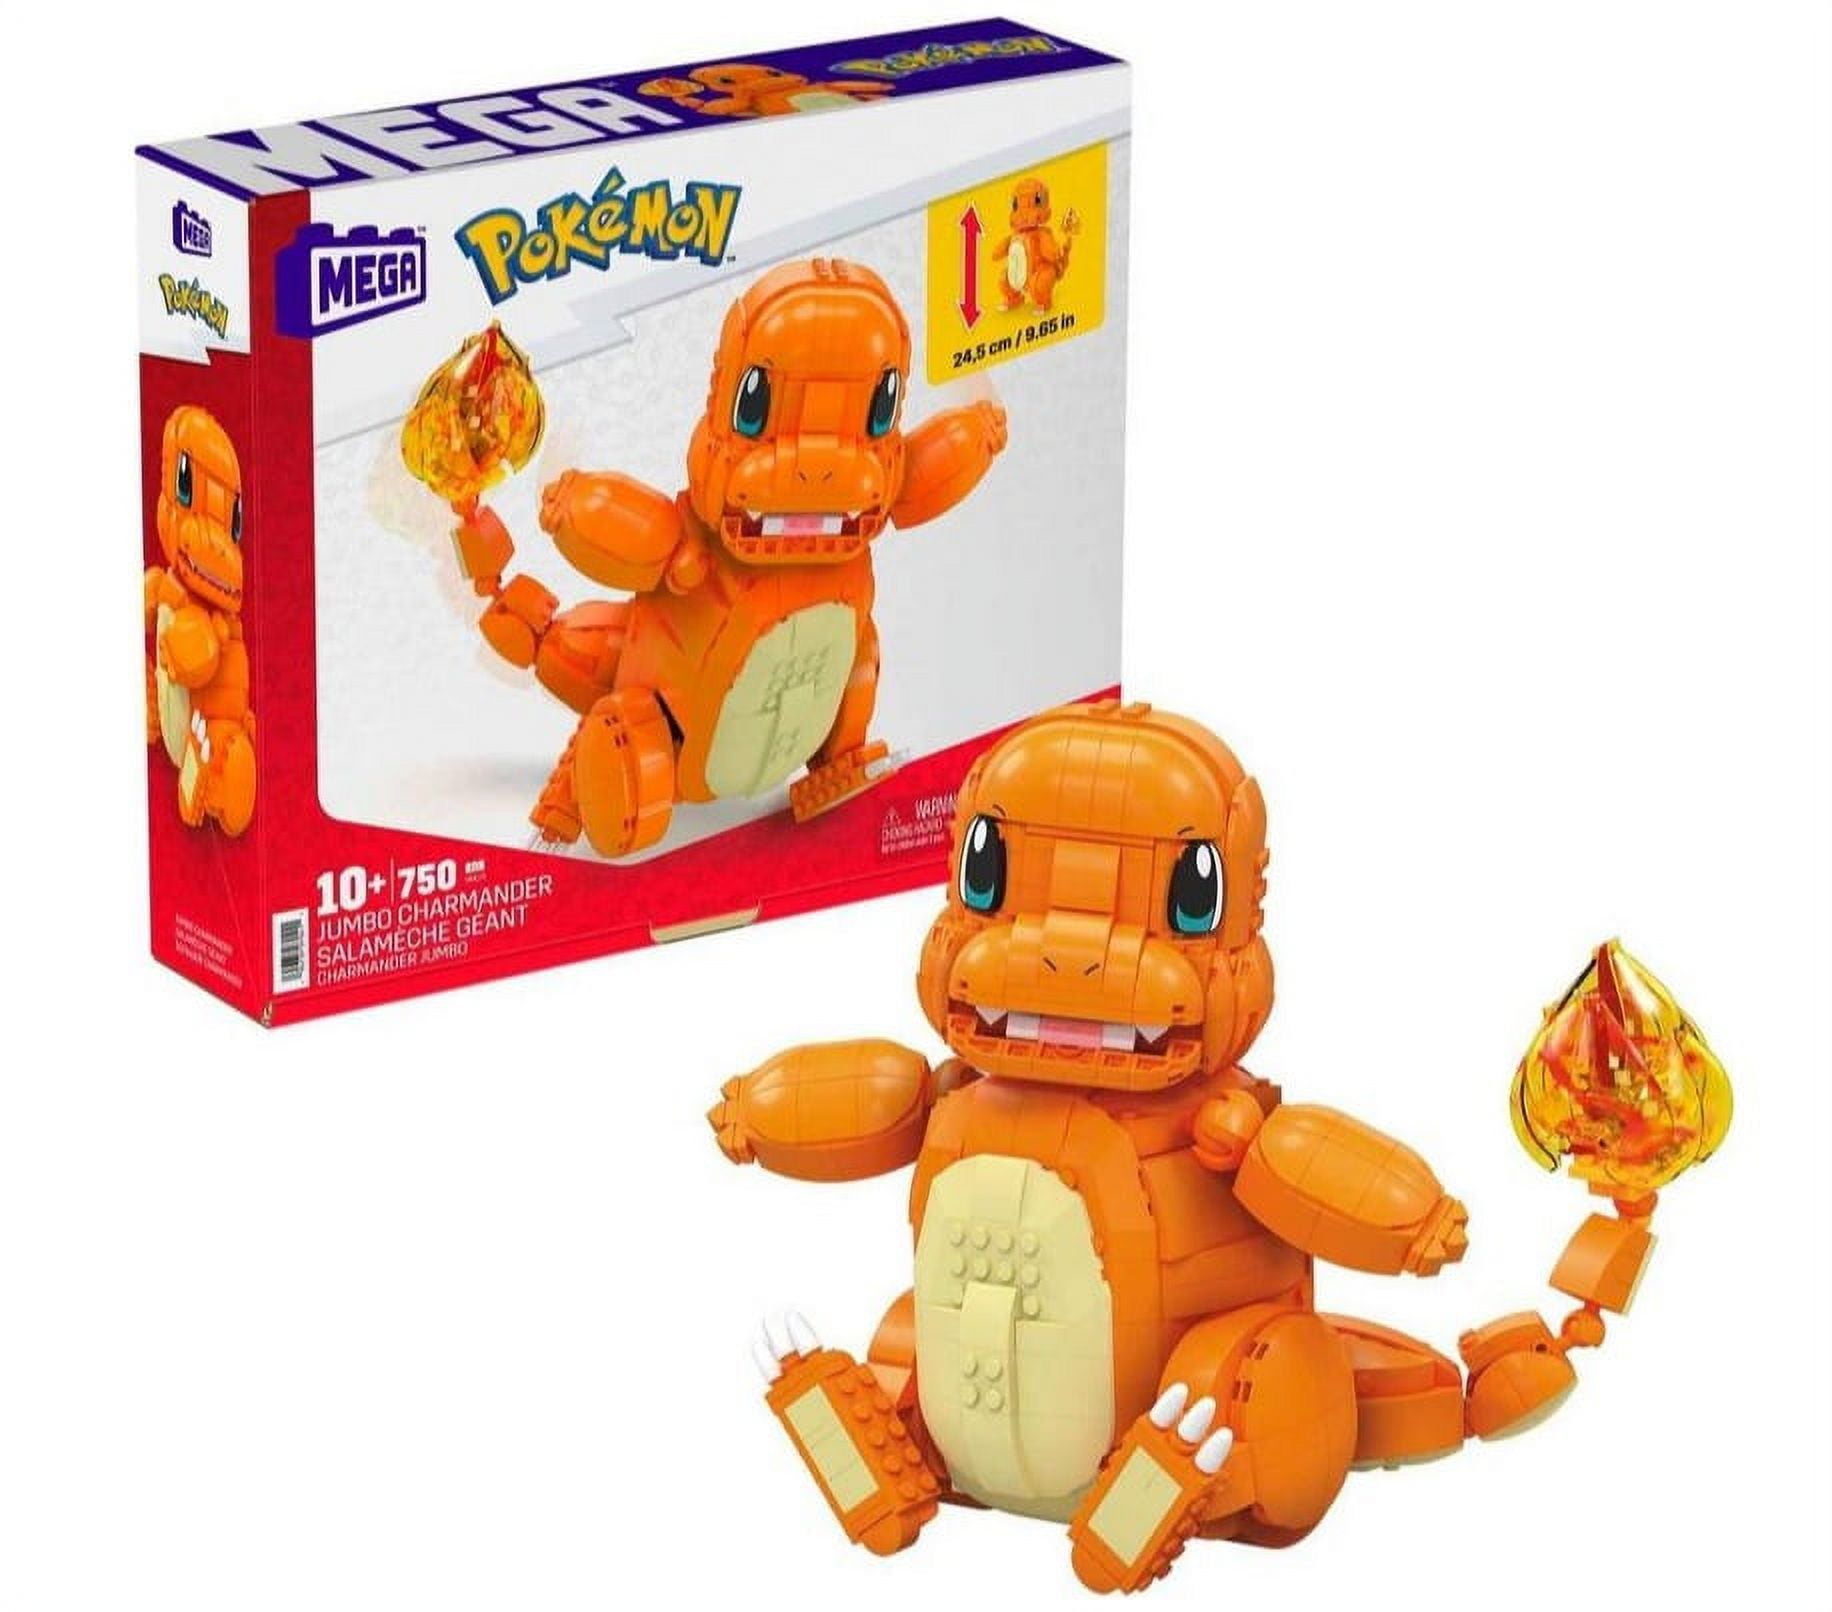 MEGA Pokémon Build & Show Charmander Toy Building Set, 4 Inches Tall,  Poseable, 185 Bricks and Pieces, for Boys and Girls, Ages 7 and Up